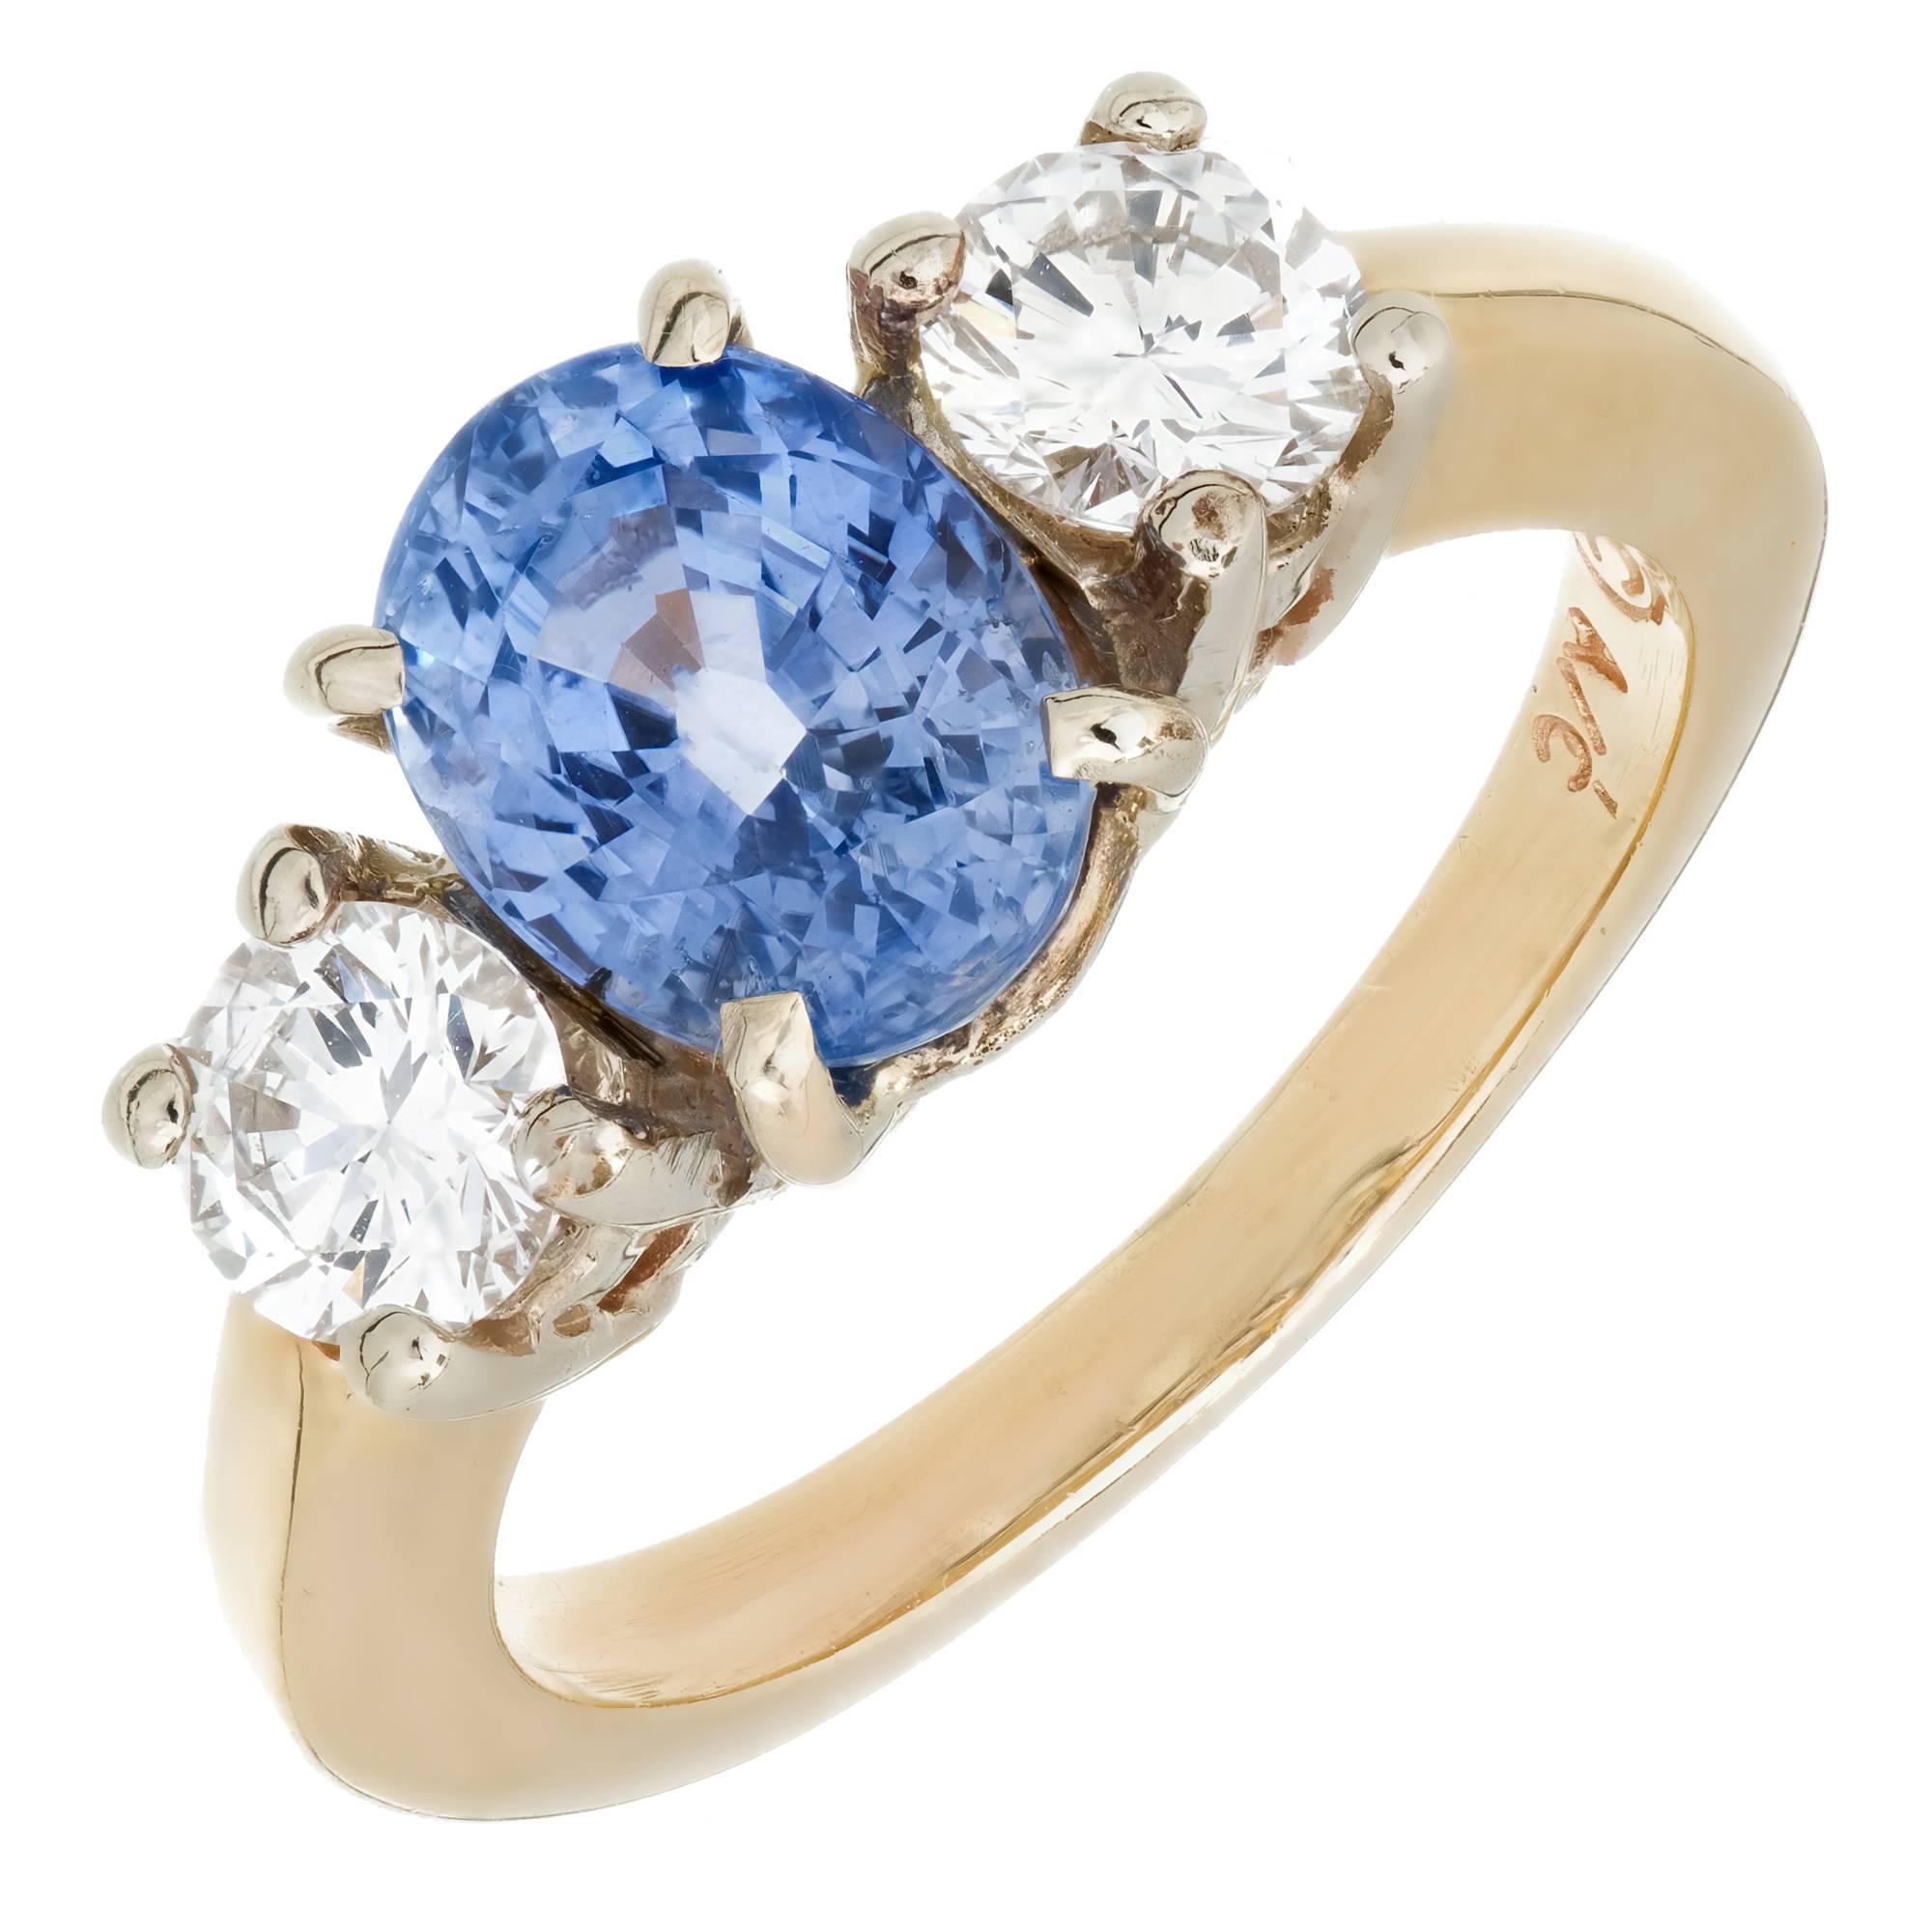 2.14 Carat Oval Natural Blue Sapphire Diamond Gold Engagement Ring